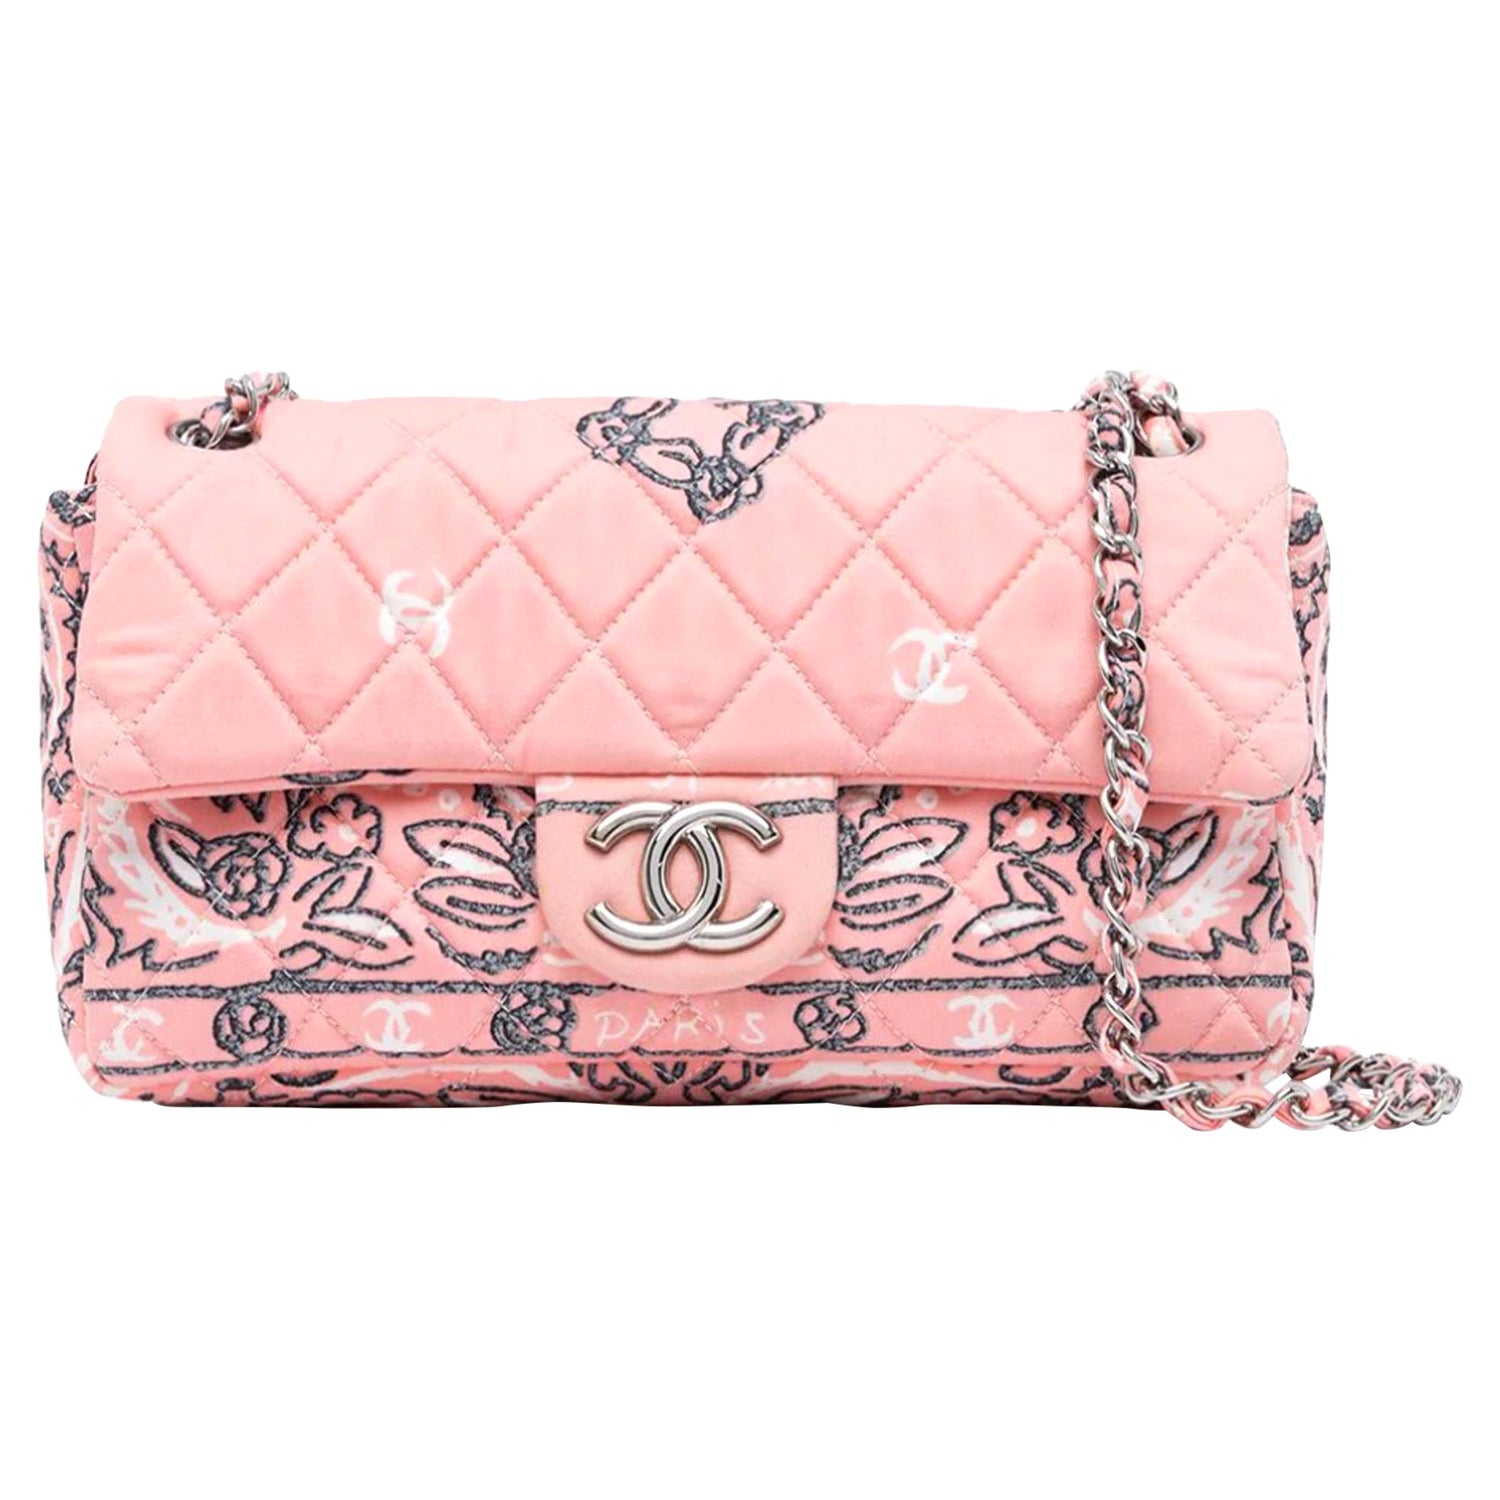 CHANEL, Bags, Authentic Chanel Mini Flap Bag Dyed Pink